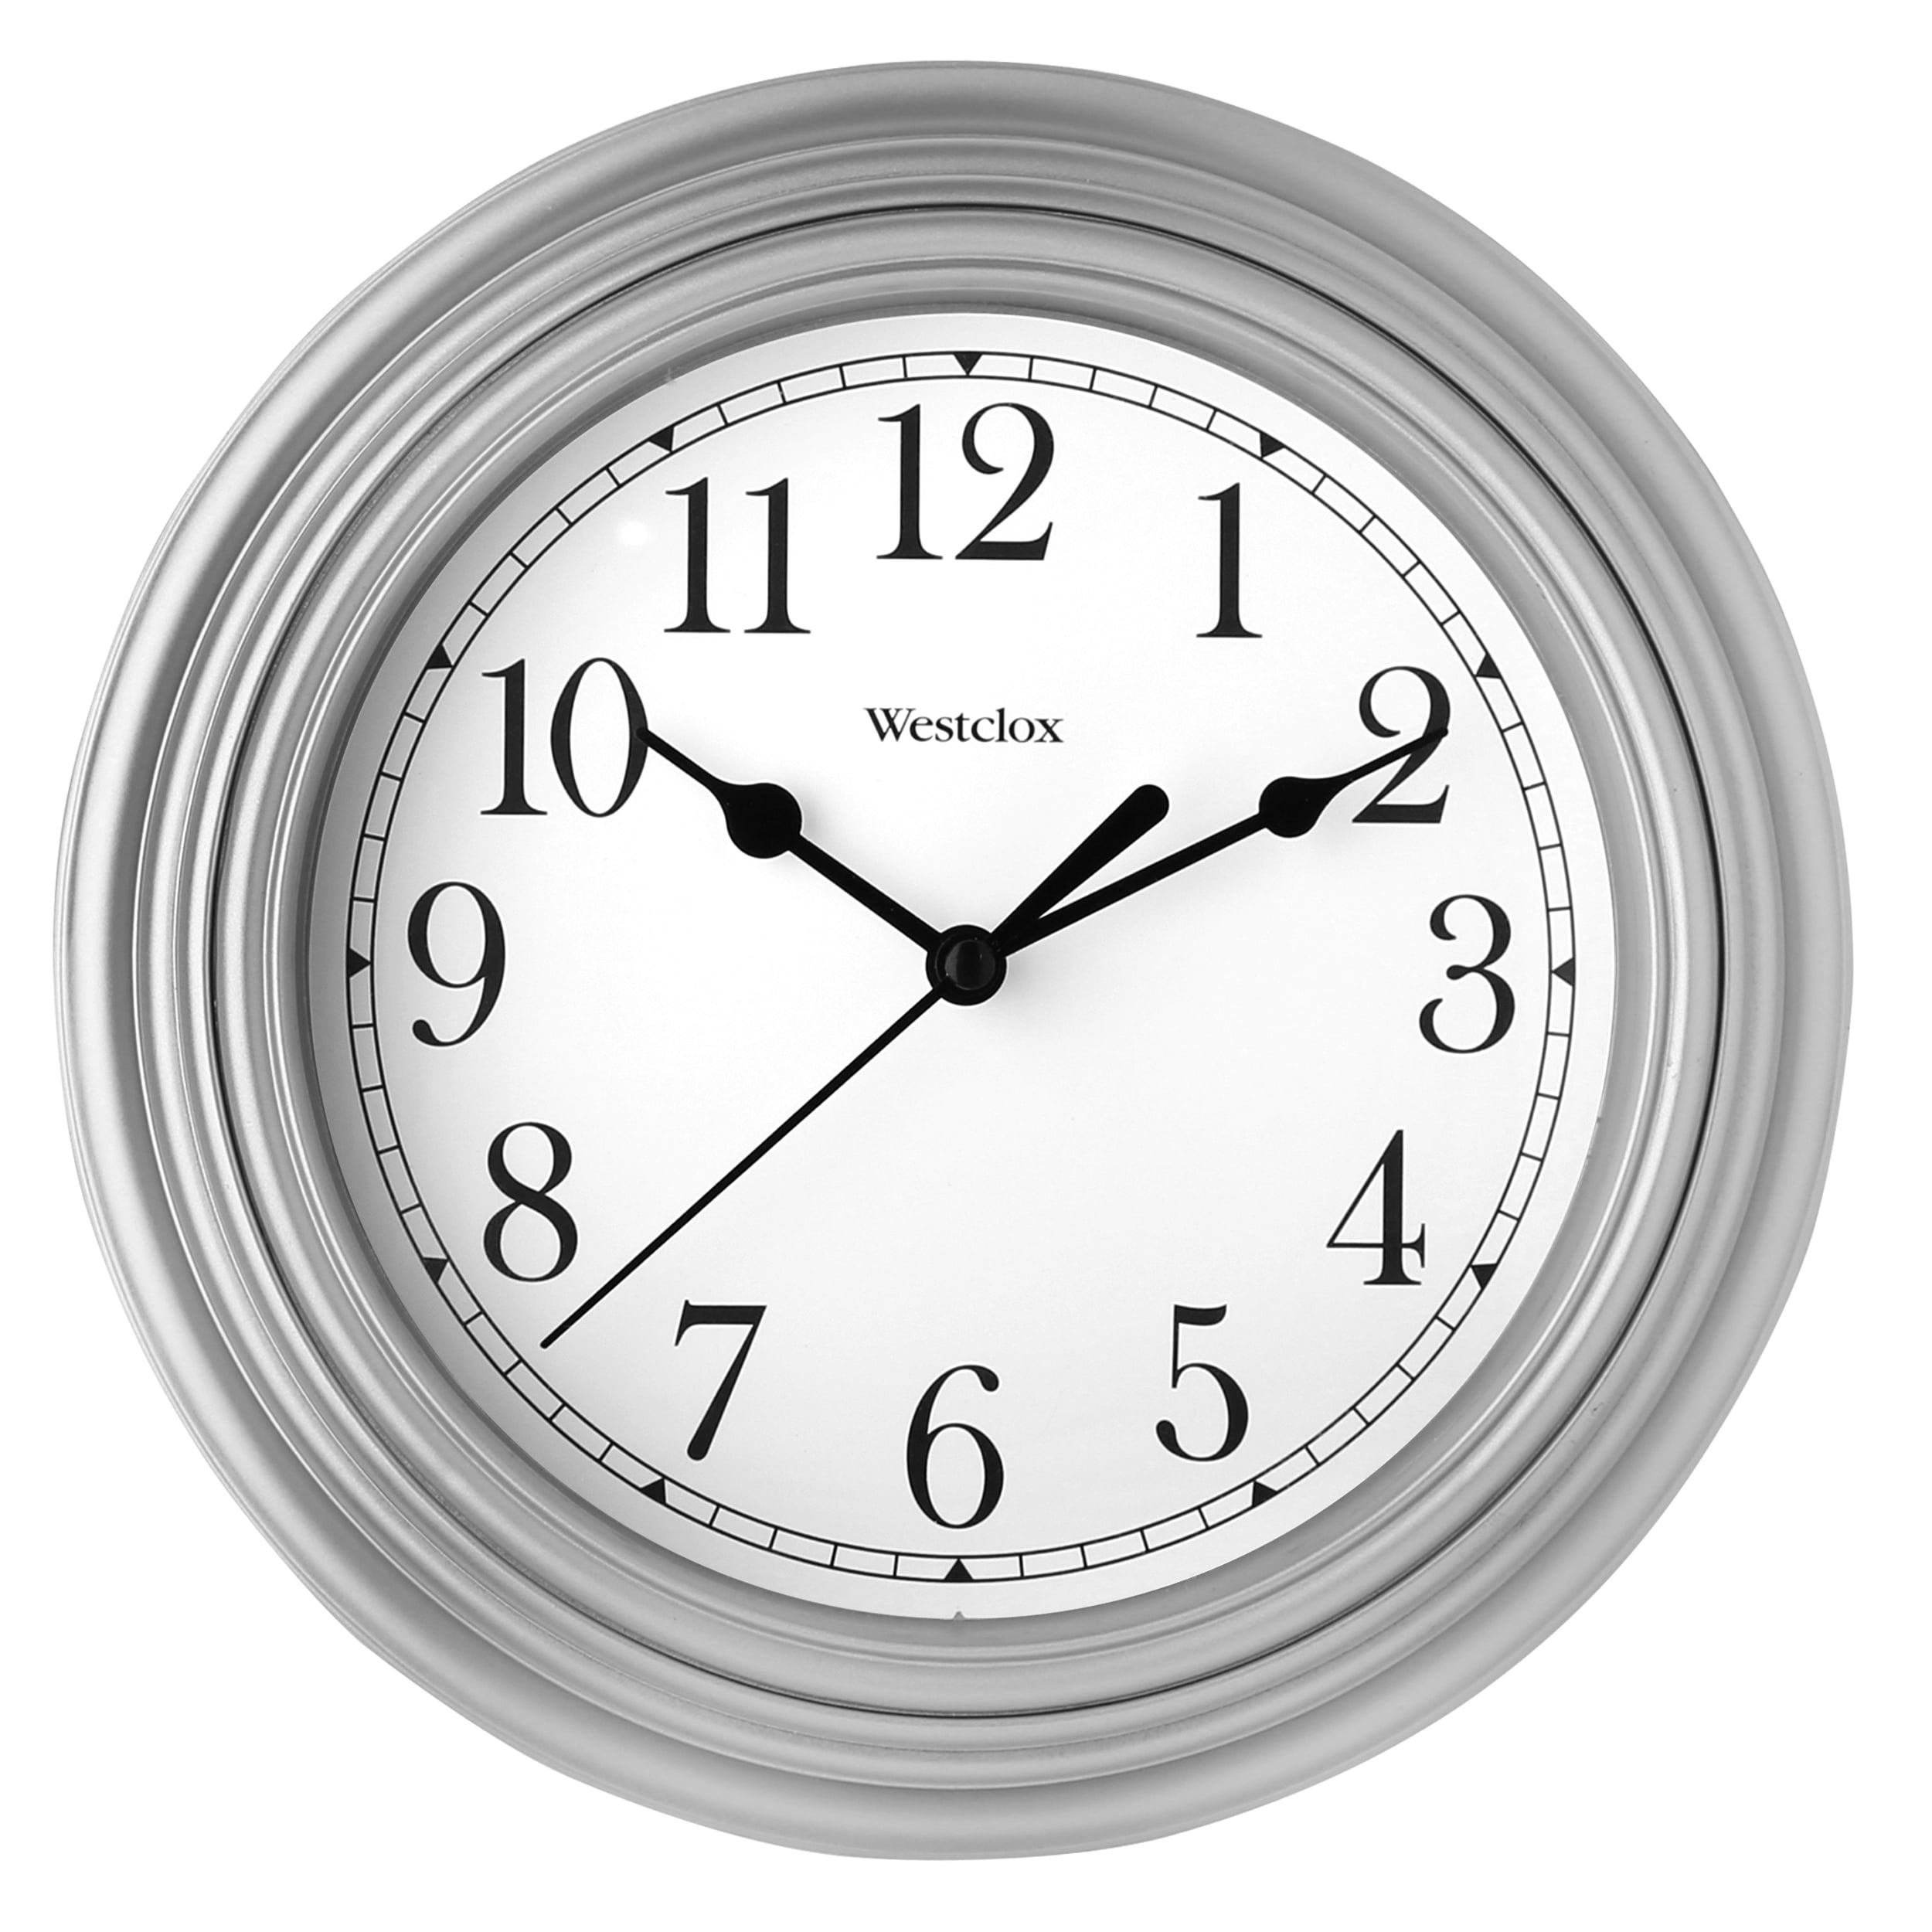 LARGE 9" QUARTZ WALL CLOCK WHITE FACE SILVER SURROUND LARGE NUMBERS  BRAND NEW 